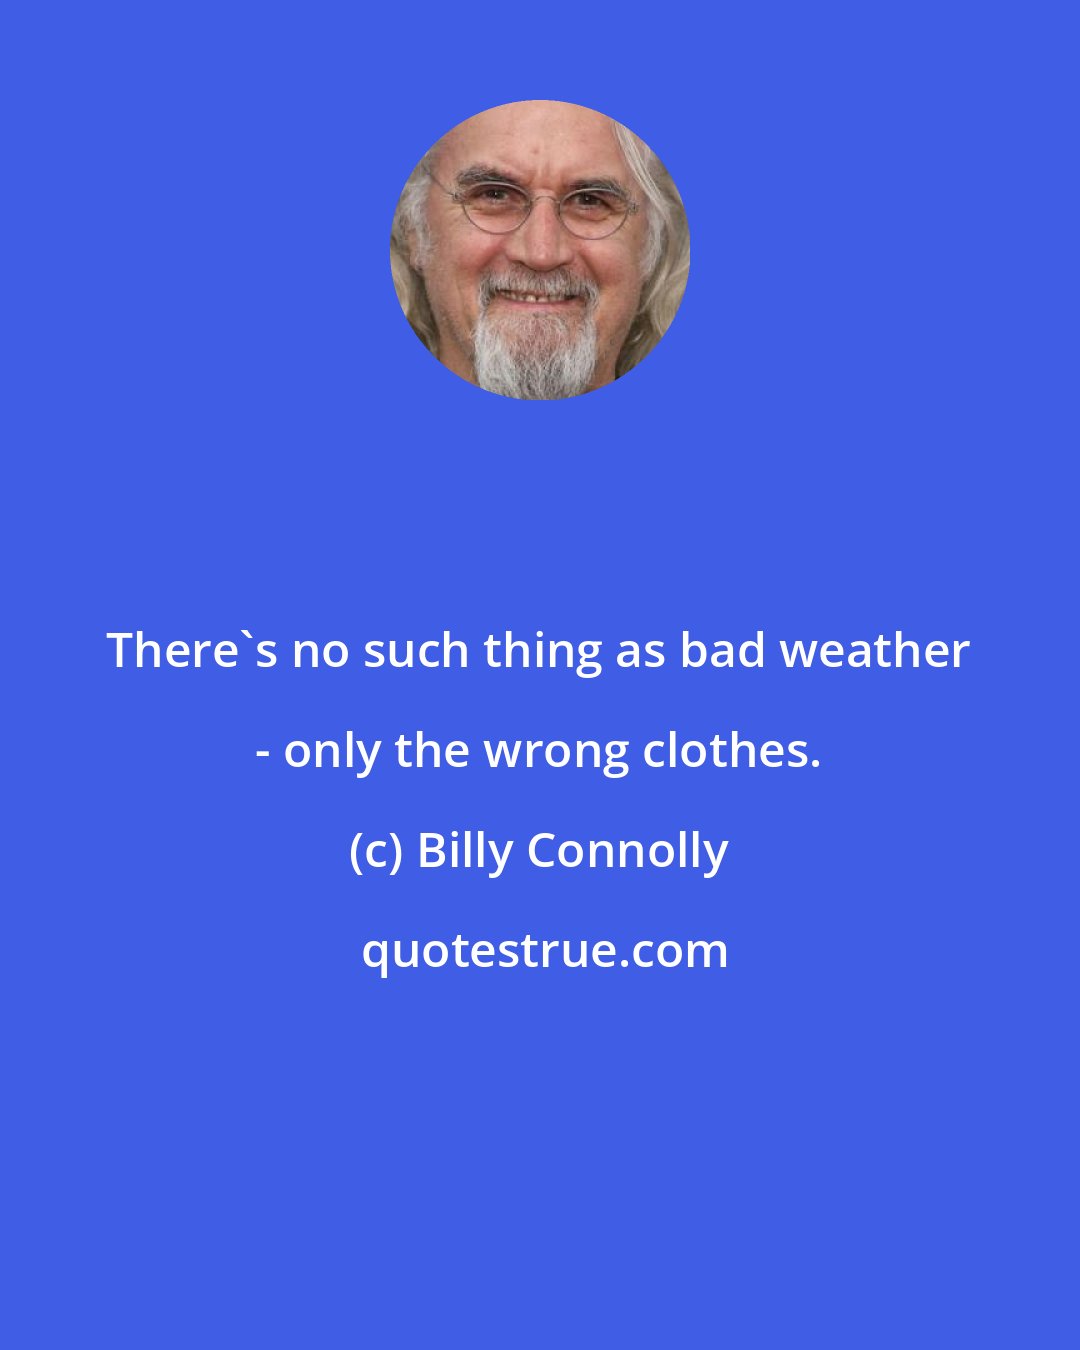 Billy Connolly: There's no such thing as bad weather - only the wrong clothes.